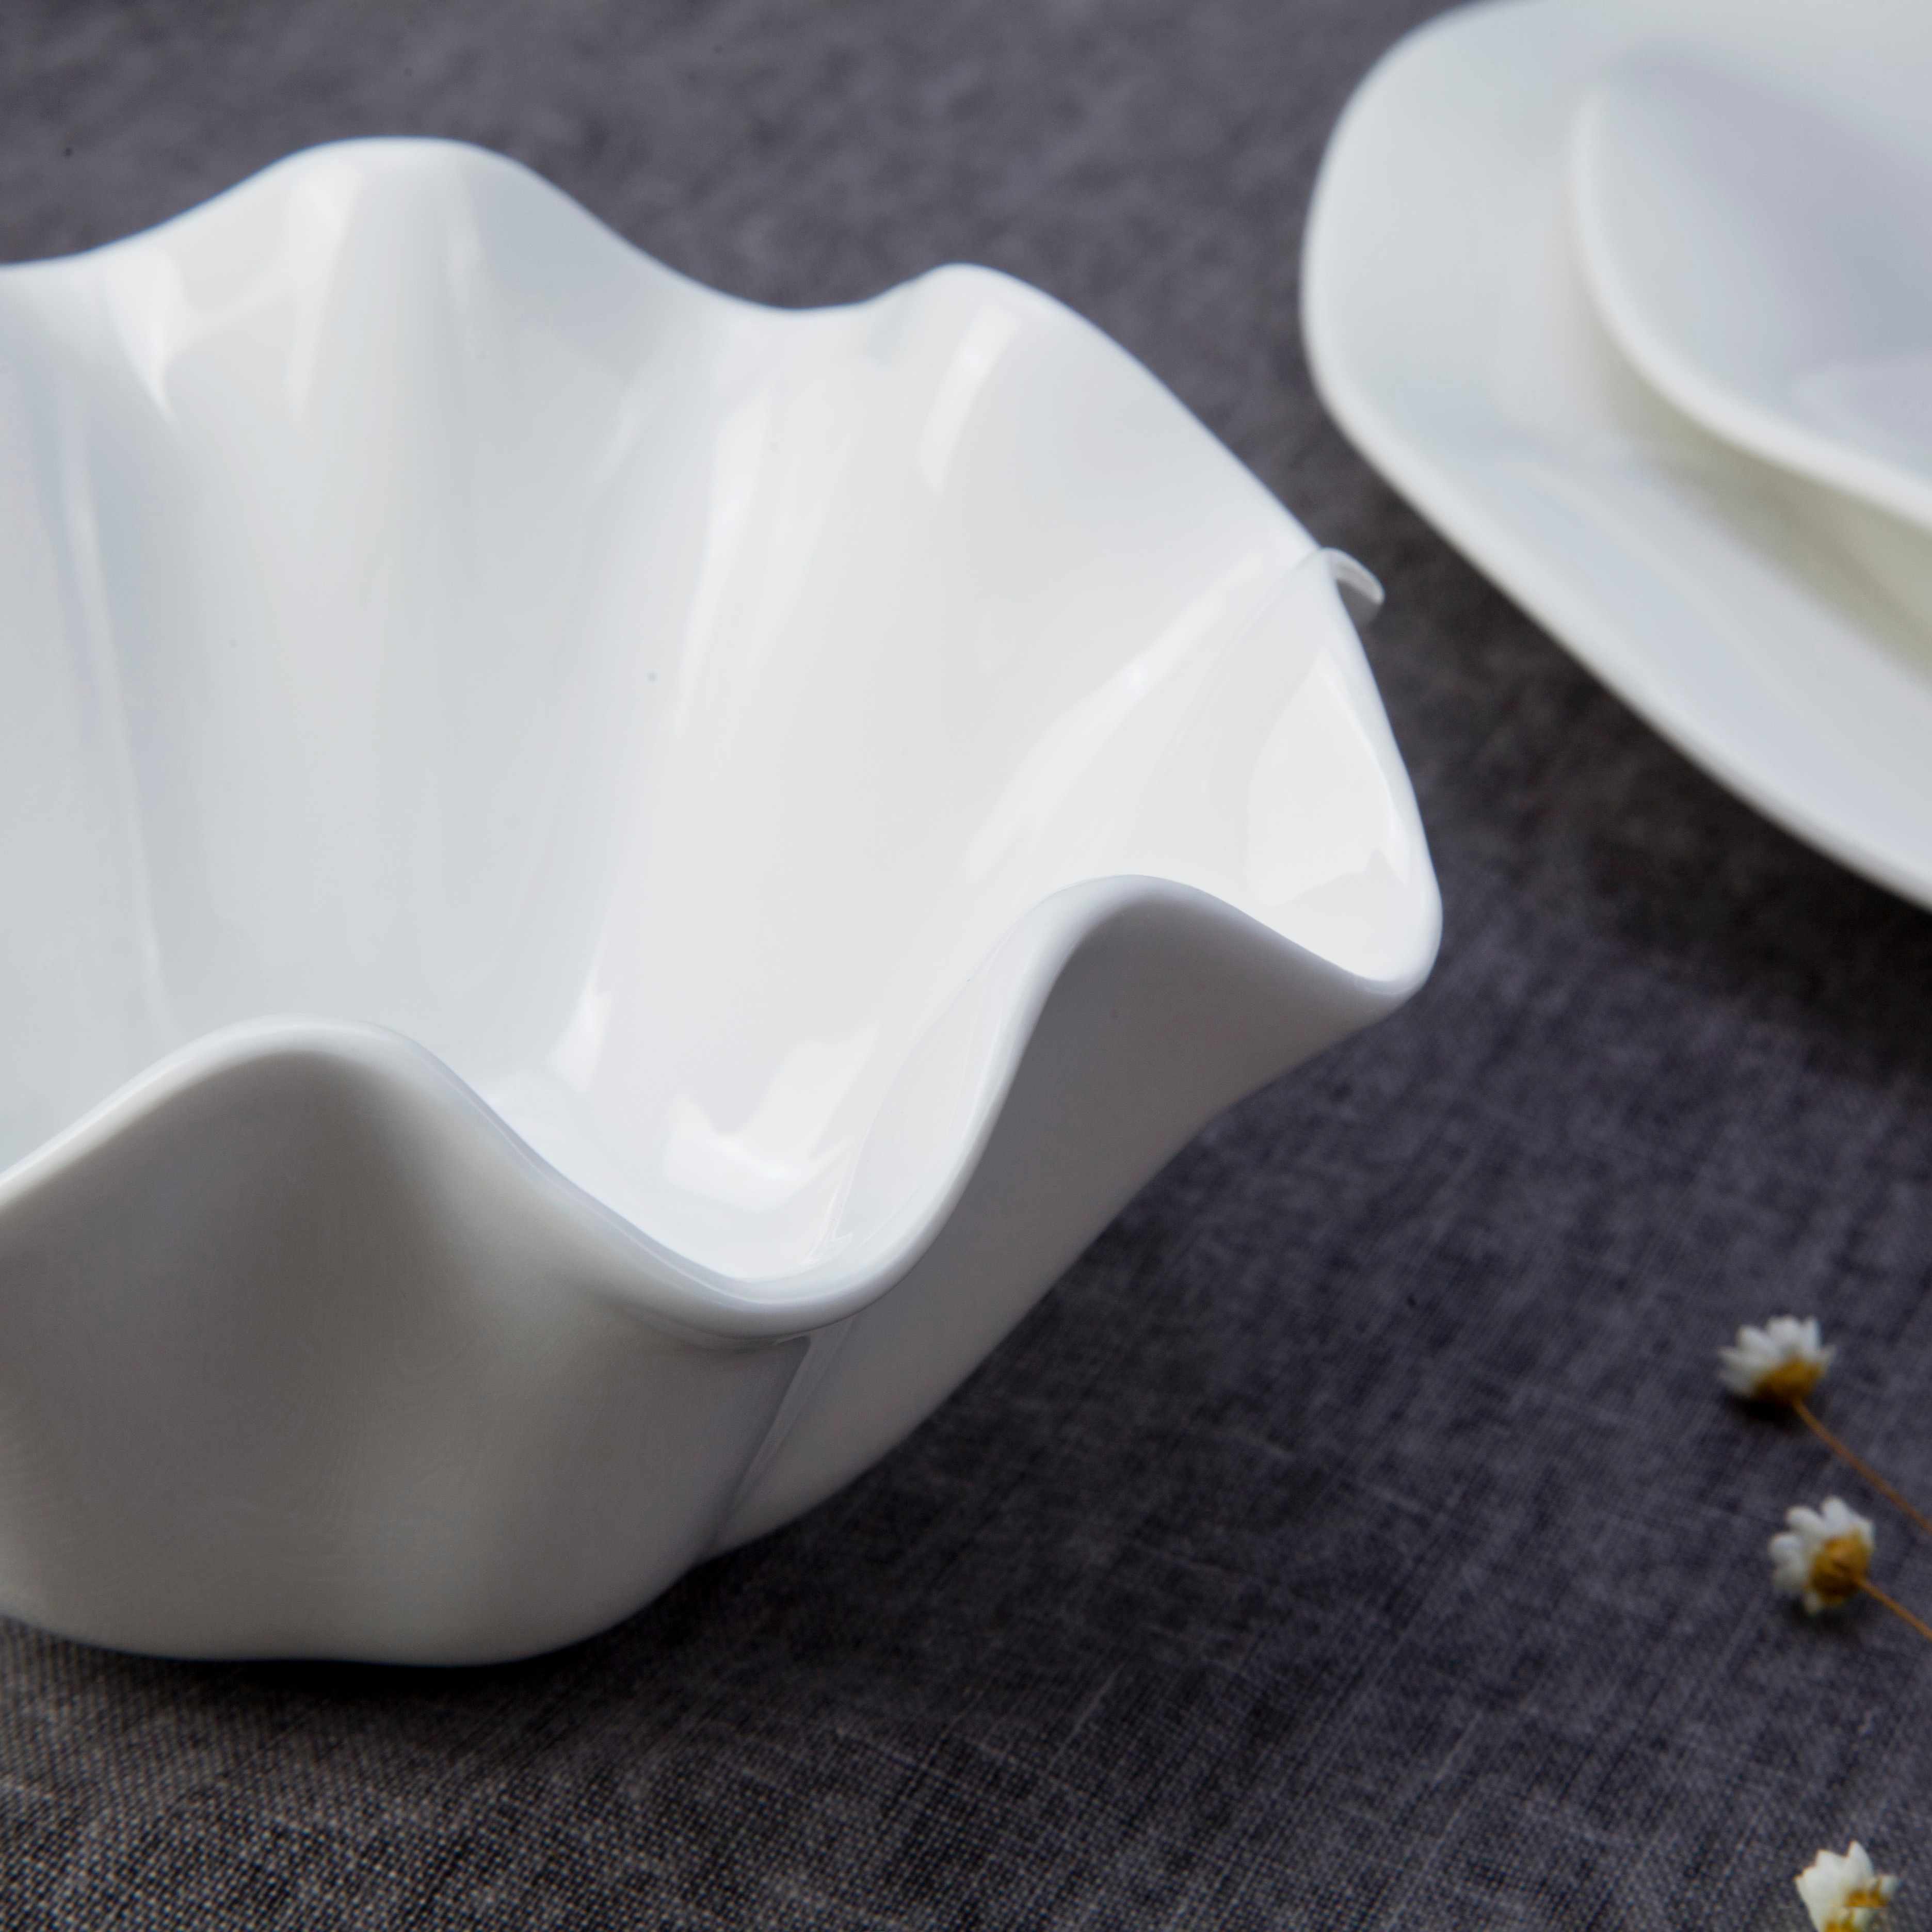 restaurant crockery for sale Using Motoring Search Engines In Selling Used Cars